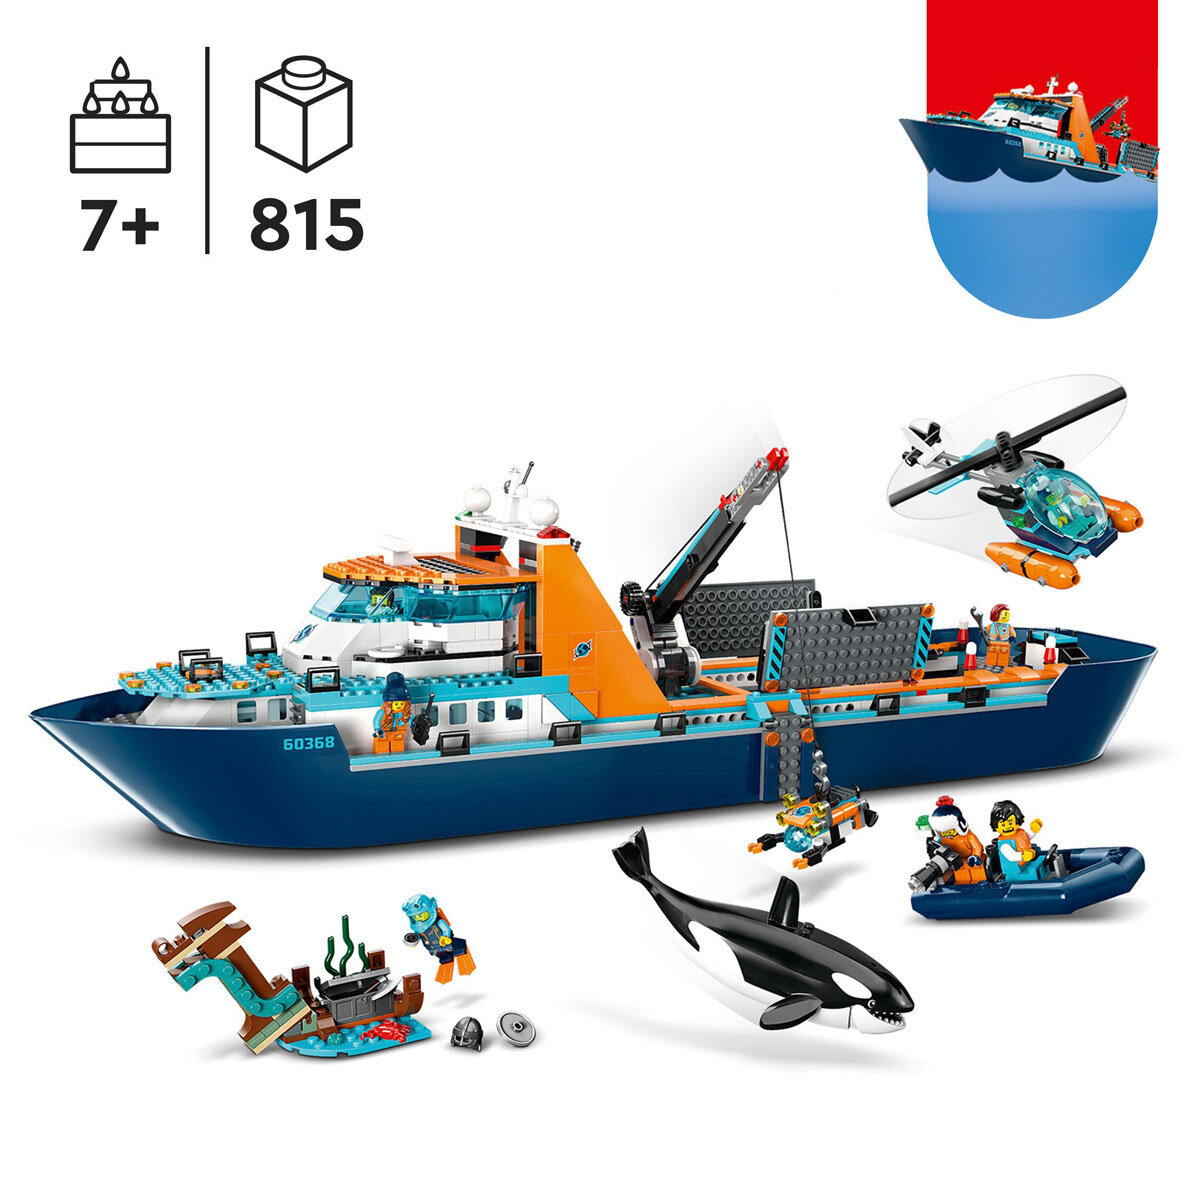 Buy LEGO City Artic Explorer Ship Overview Image at Costco.co.uk